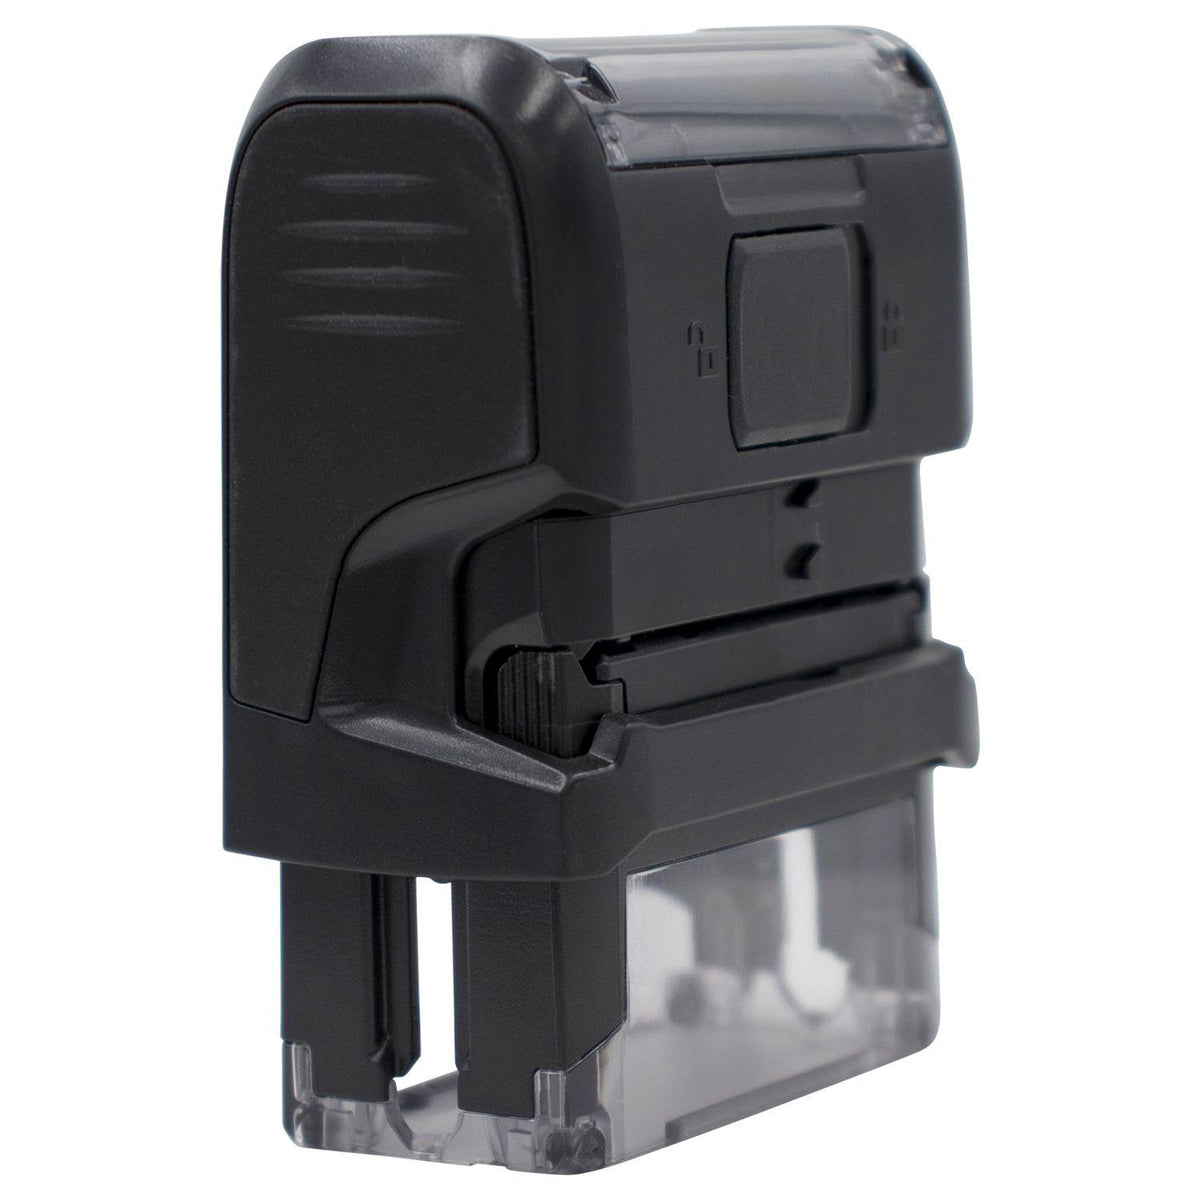 Large Self-Inking Special Services Stamp - Engineer Seal Stamps - Brand_Trodat, Impression Size_Large, Stamp Type_Self-Inking Stamp, Type of Use_Business, Type of Use_Postal &amp; Mailing